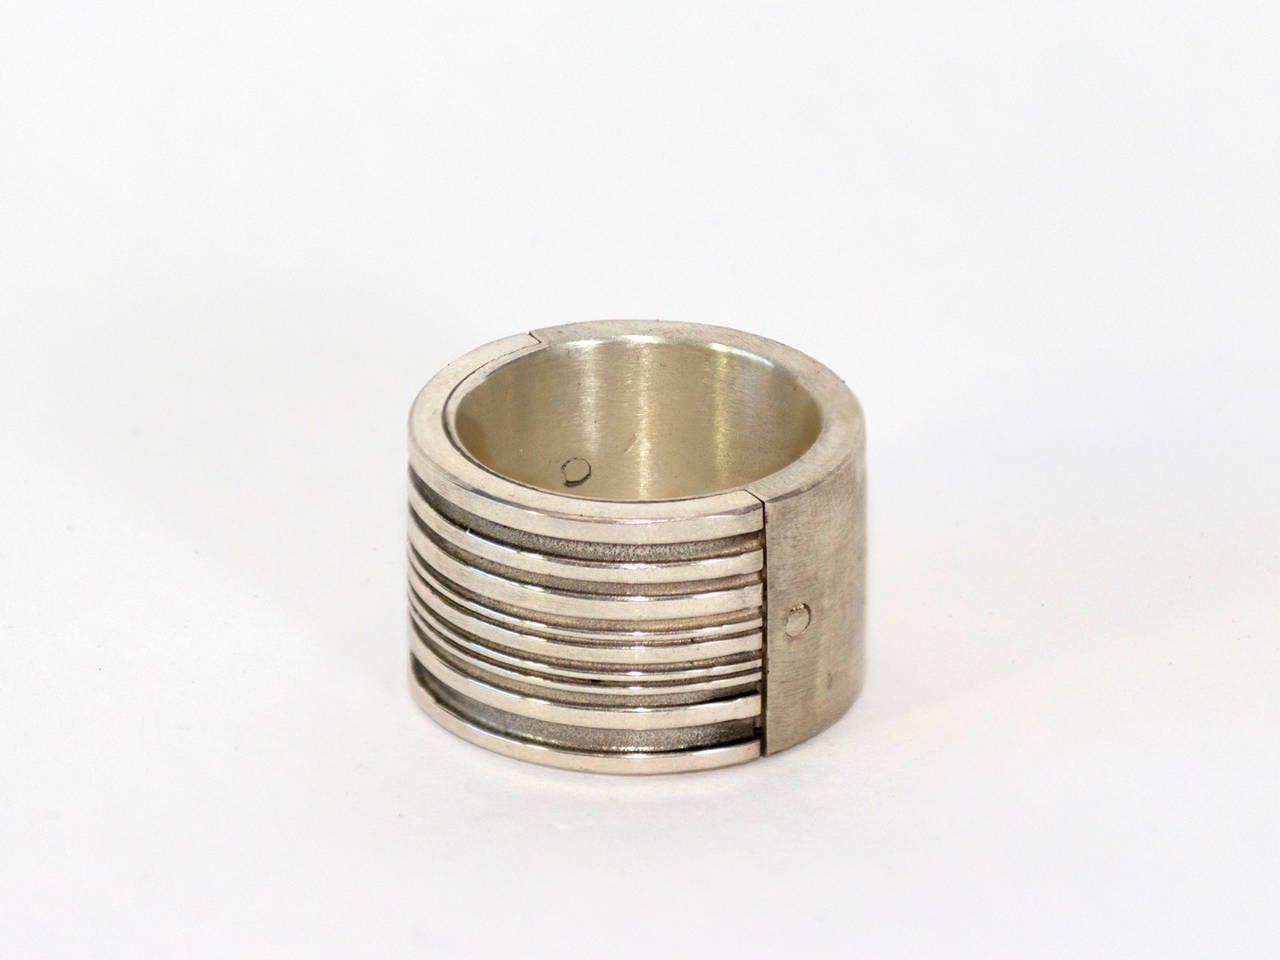 Sistema Ring by P/4 in matte sterling and polished sterling.